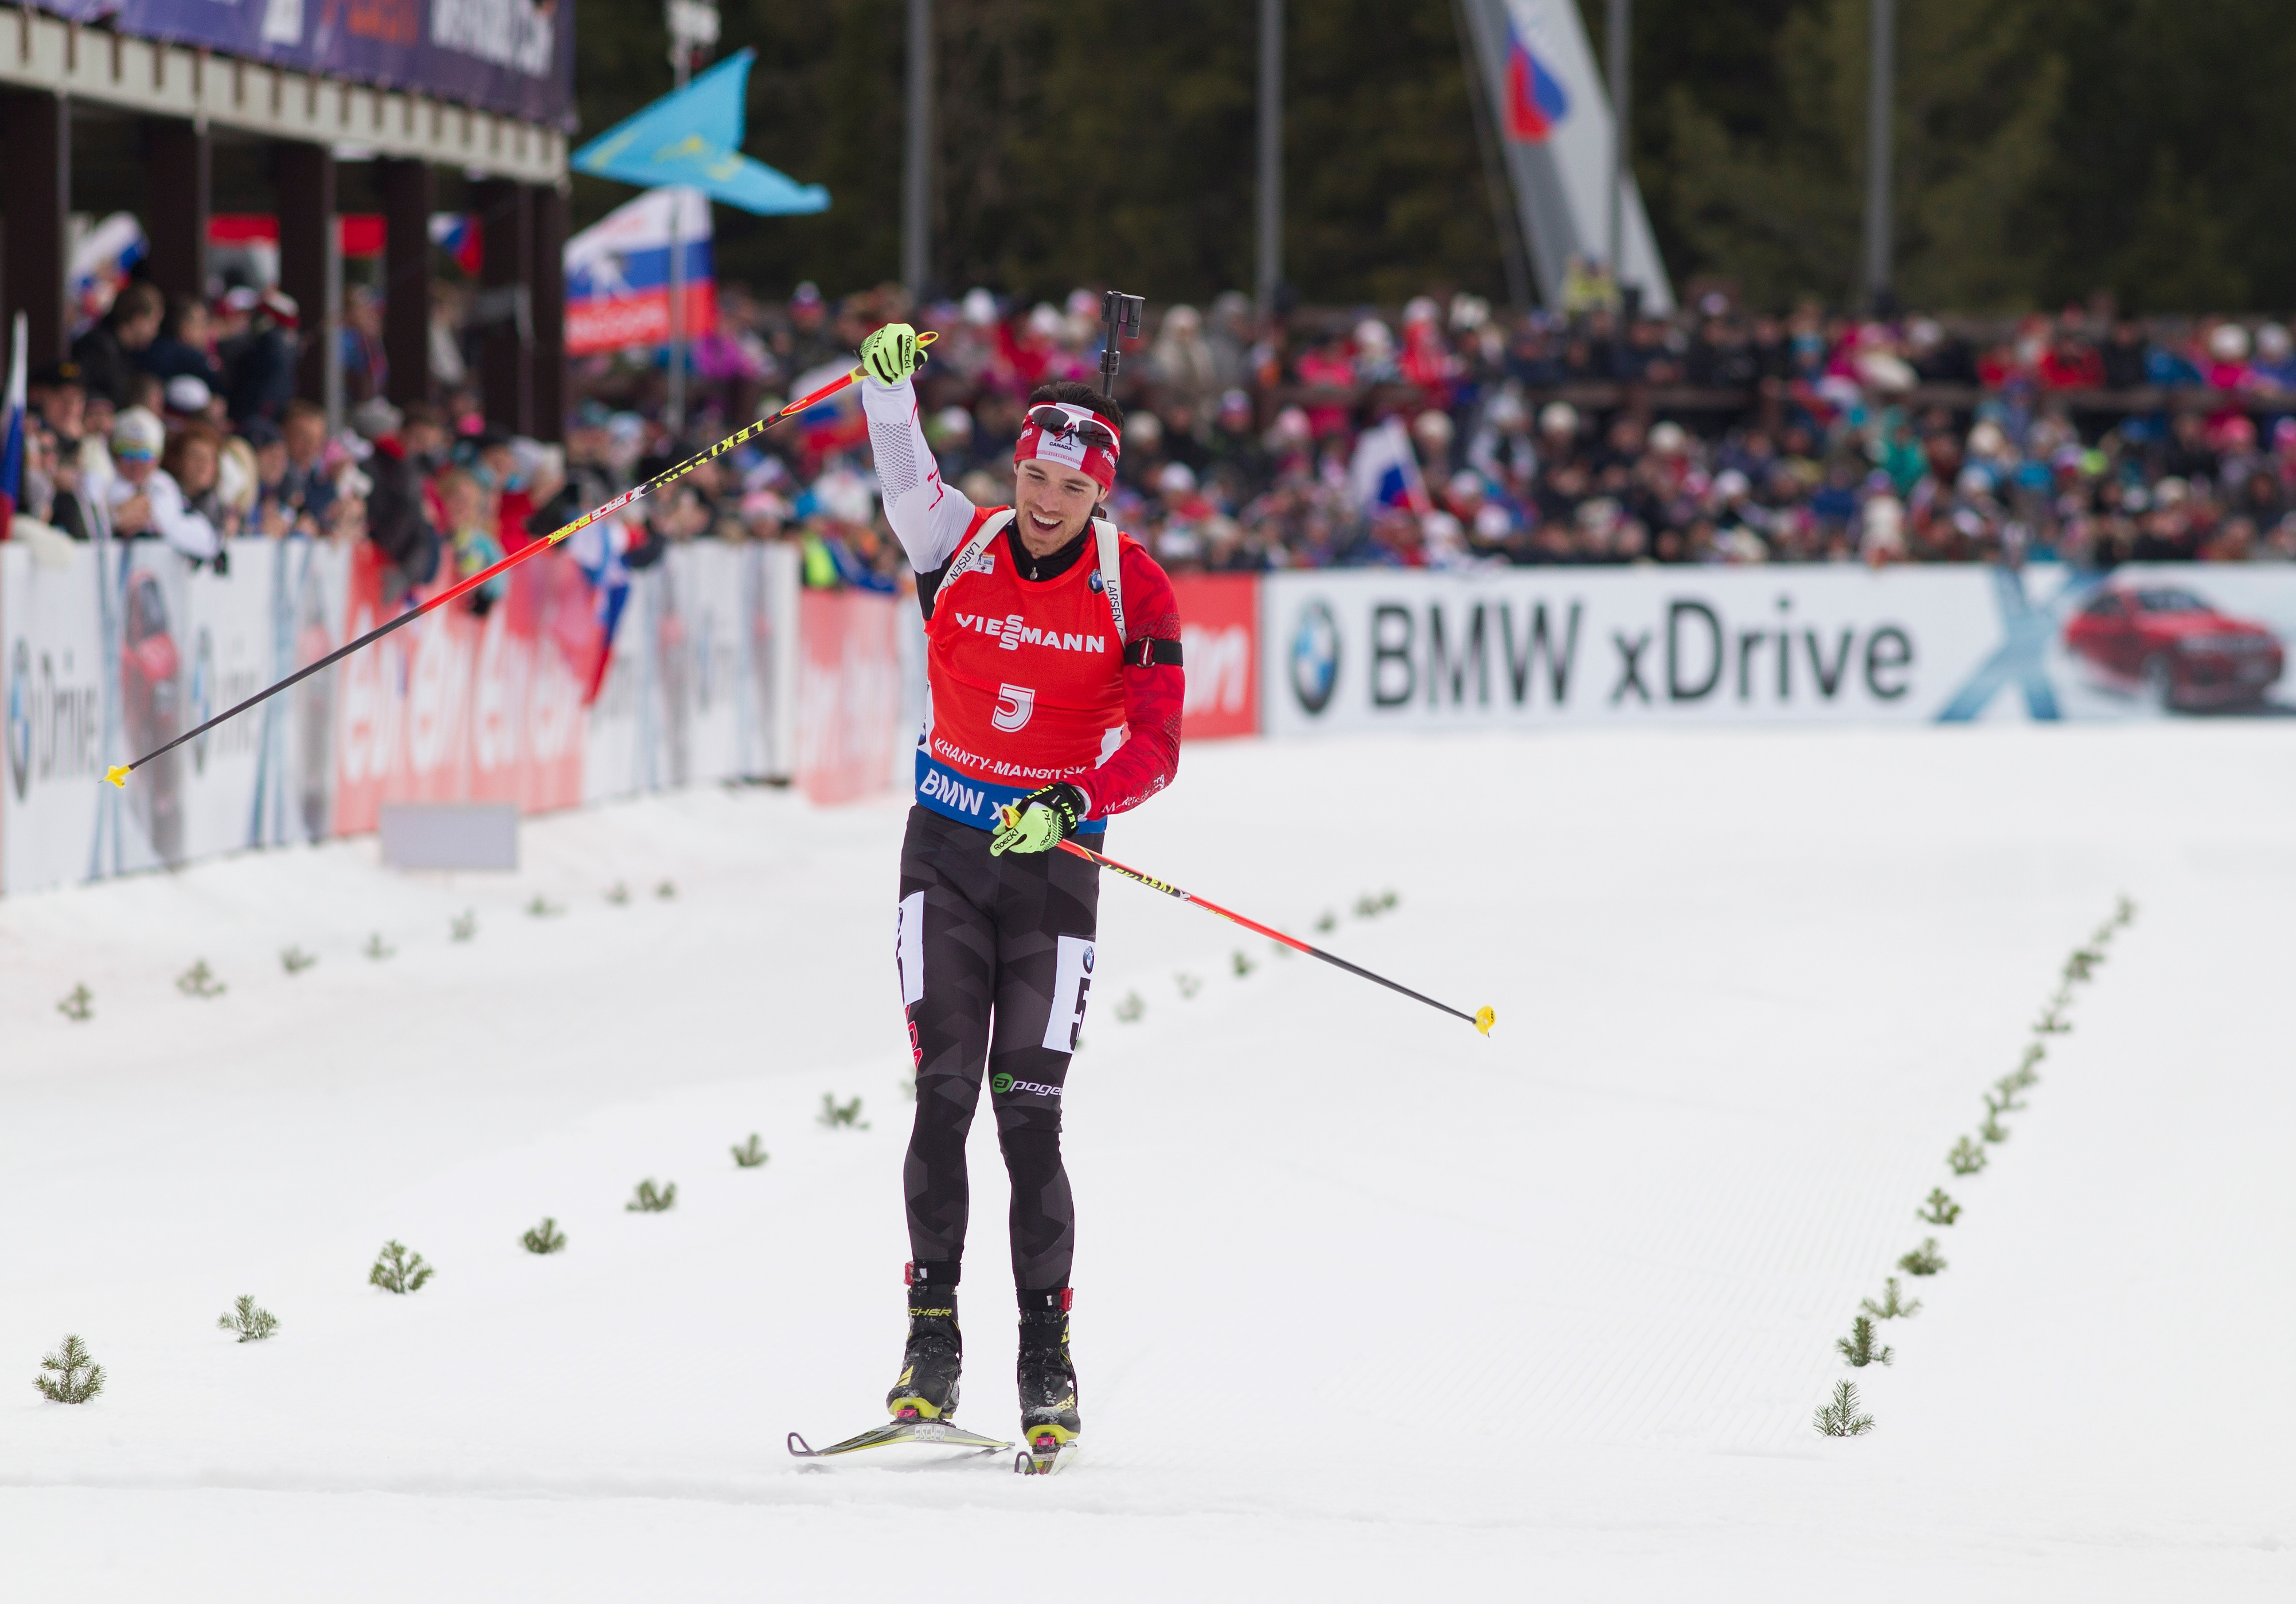 Nathan Smith of Canada celebrates as he crosses the finish line all alone after the 12.5 k pursuit in Khanty-Mansiysk, Russia, for his first career World Cup victory. (Photo: Biathlon Canada/NordicFocus.com)